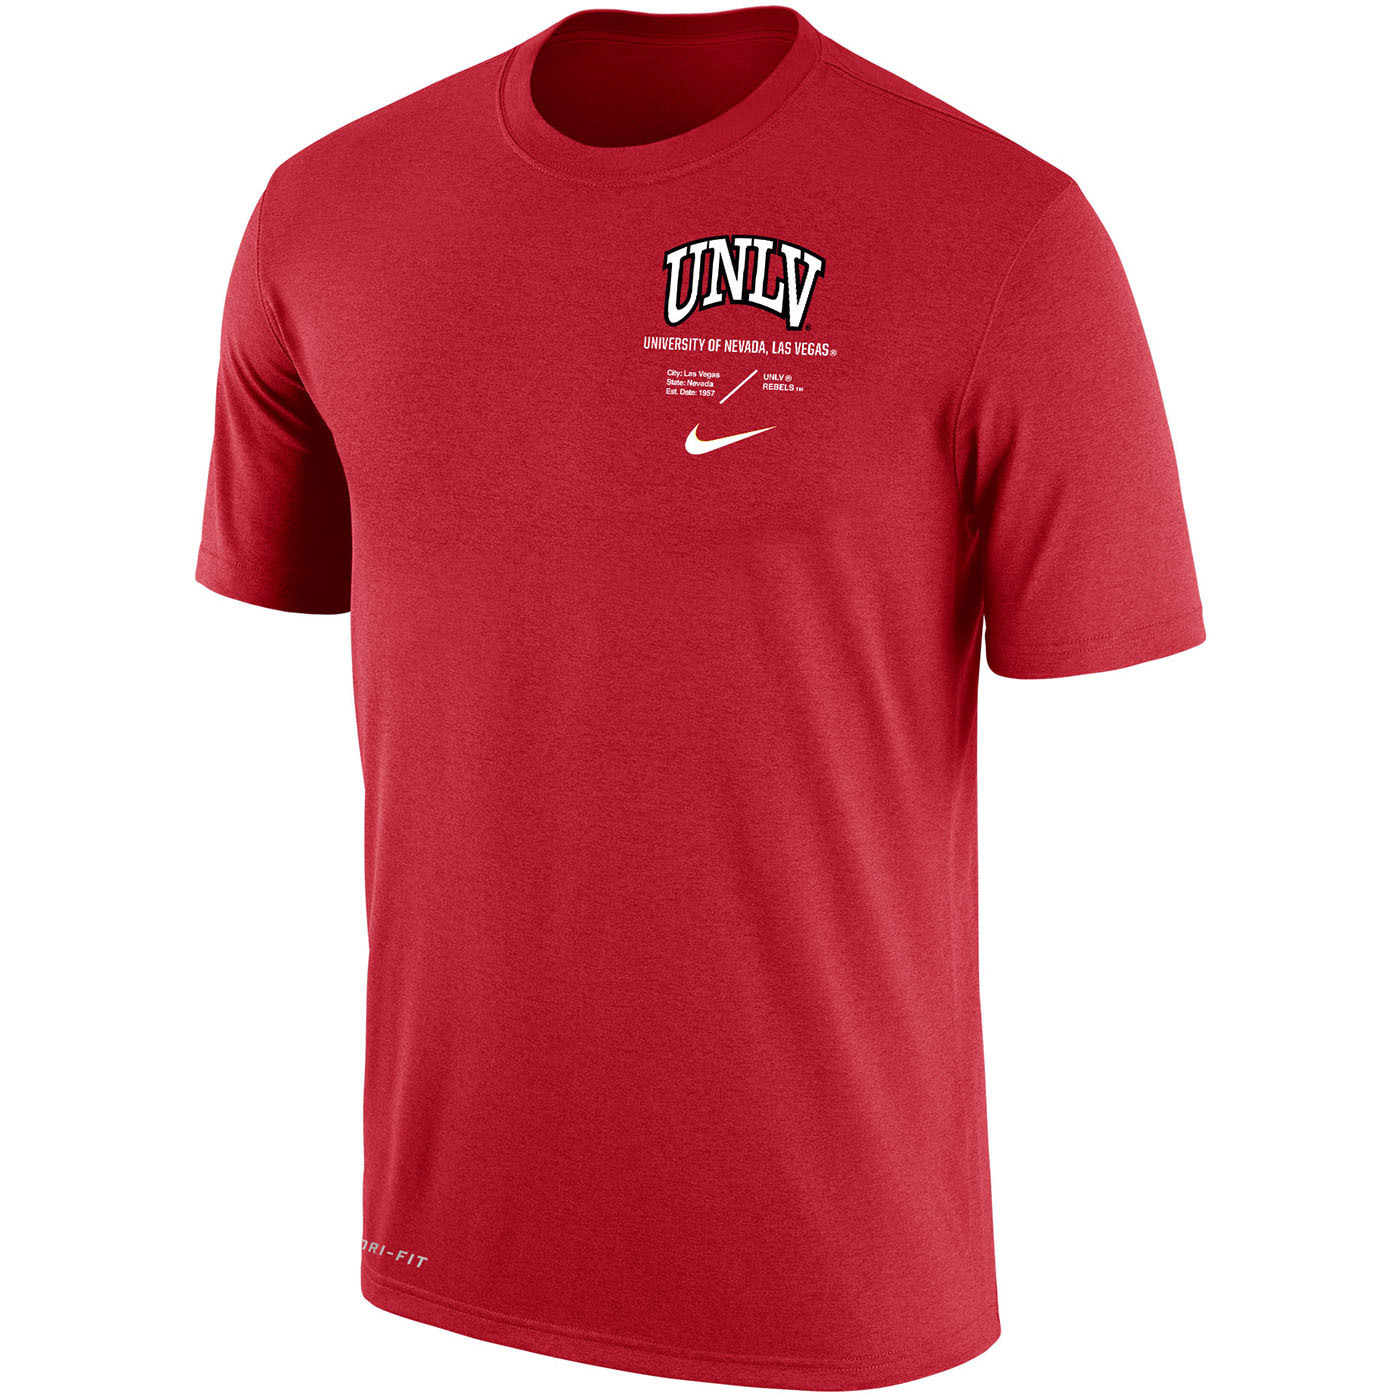 Product Detail | NIKE UNLV DRI-FIT COTTON TEAM ISSUE SHORT SLEEVE